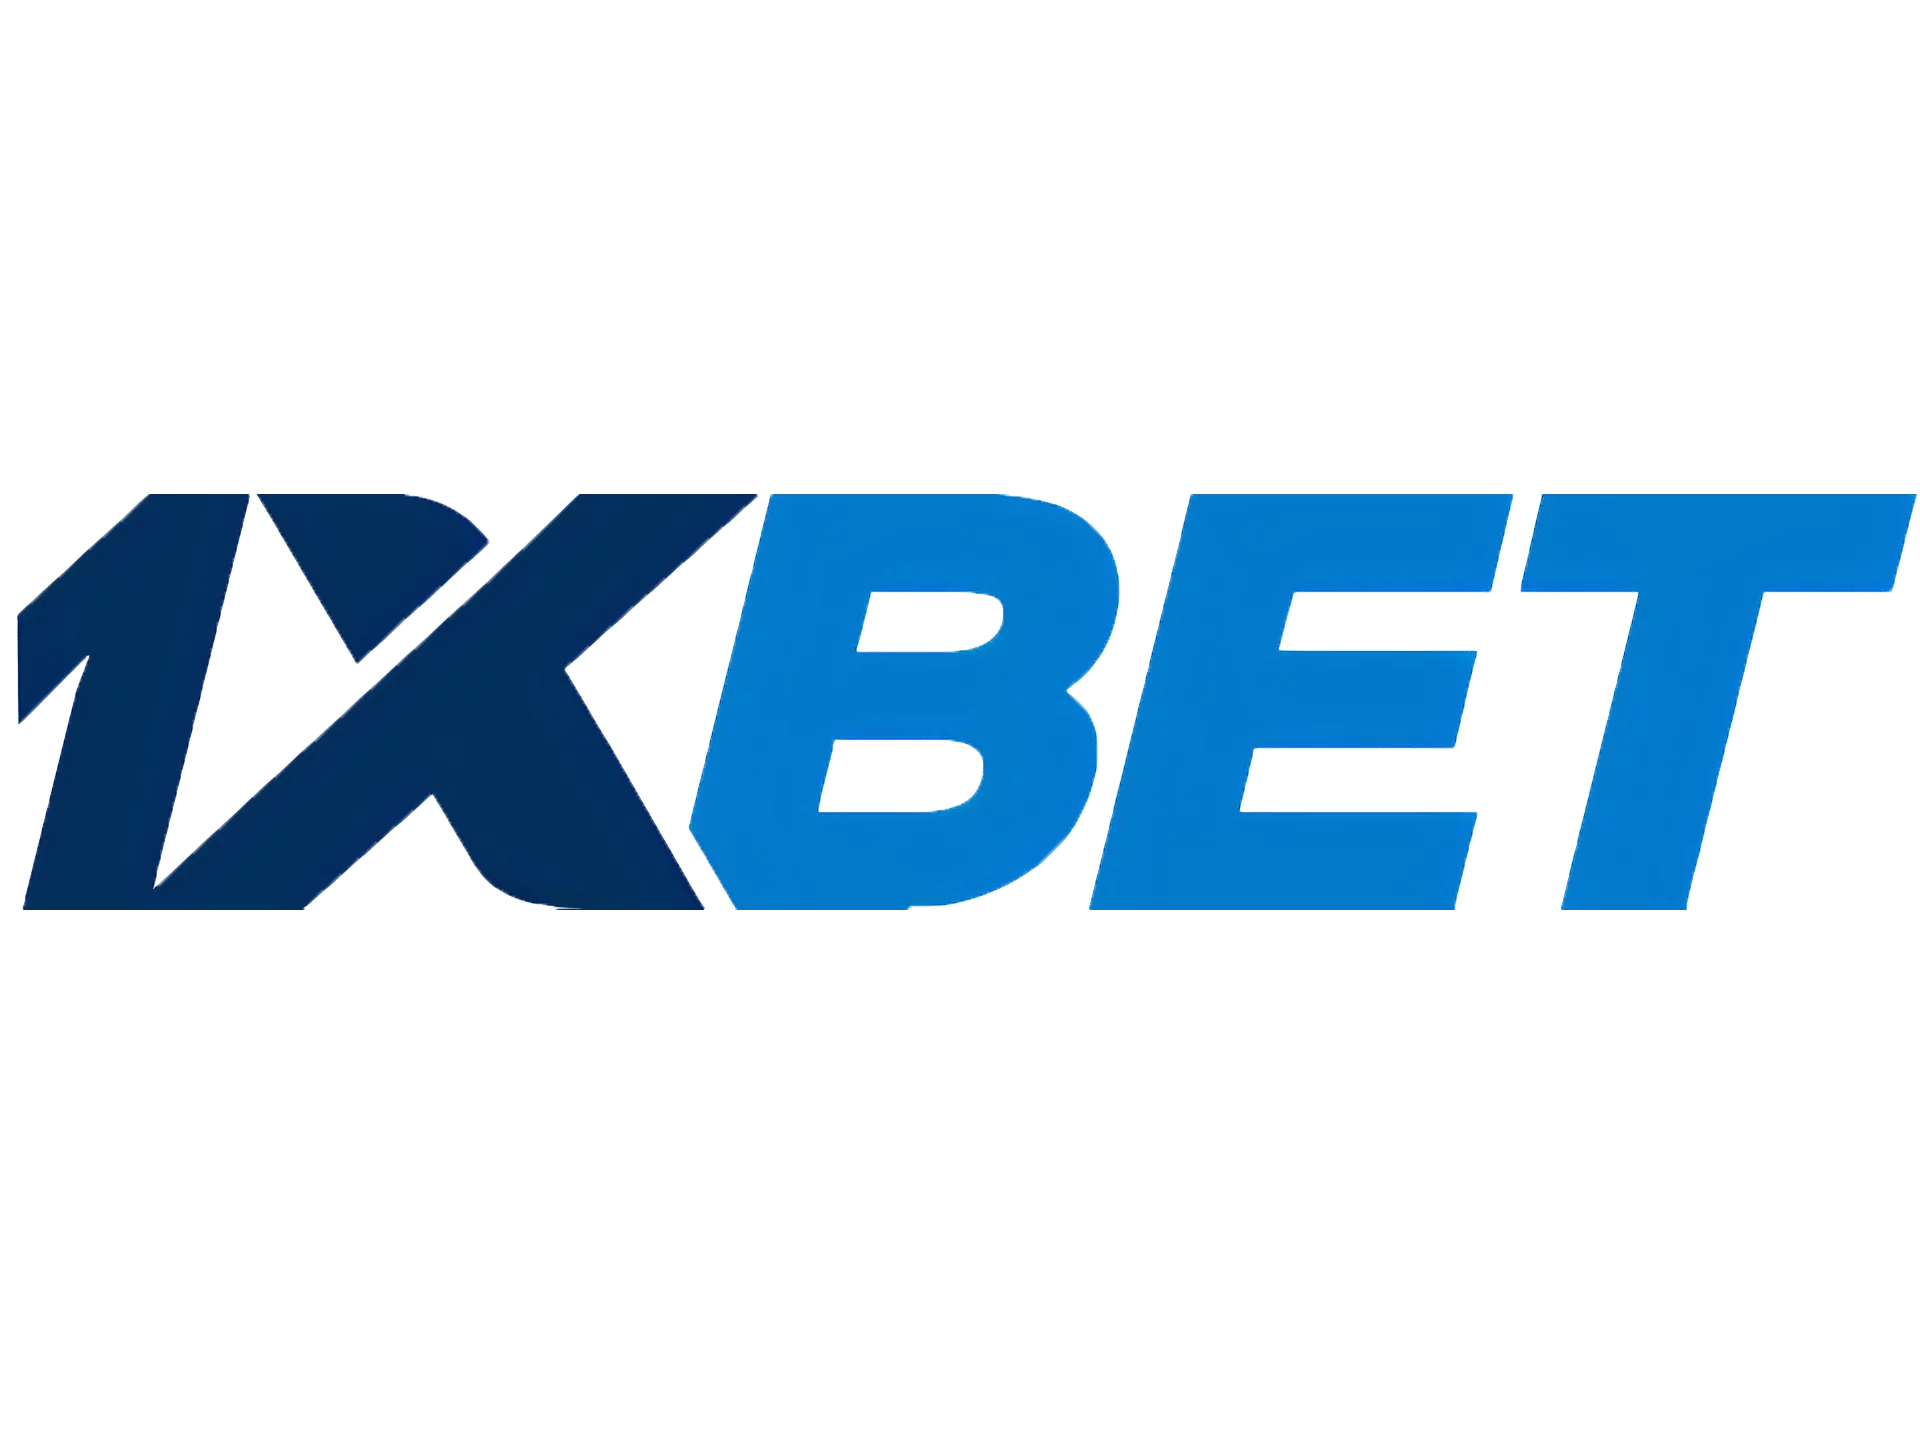 Download 1Xbet mobile app and start betting on cricket.